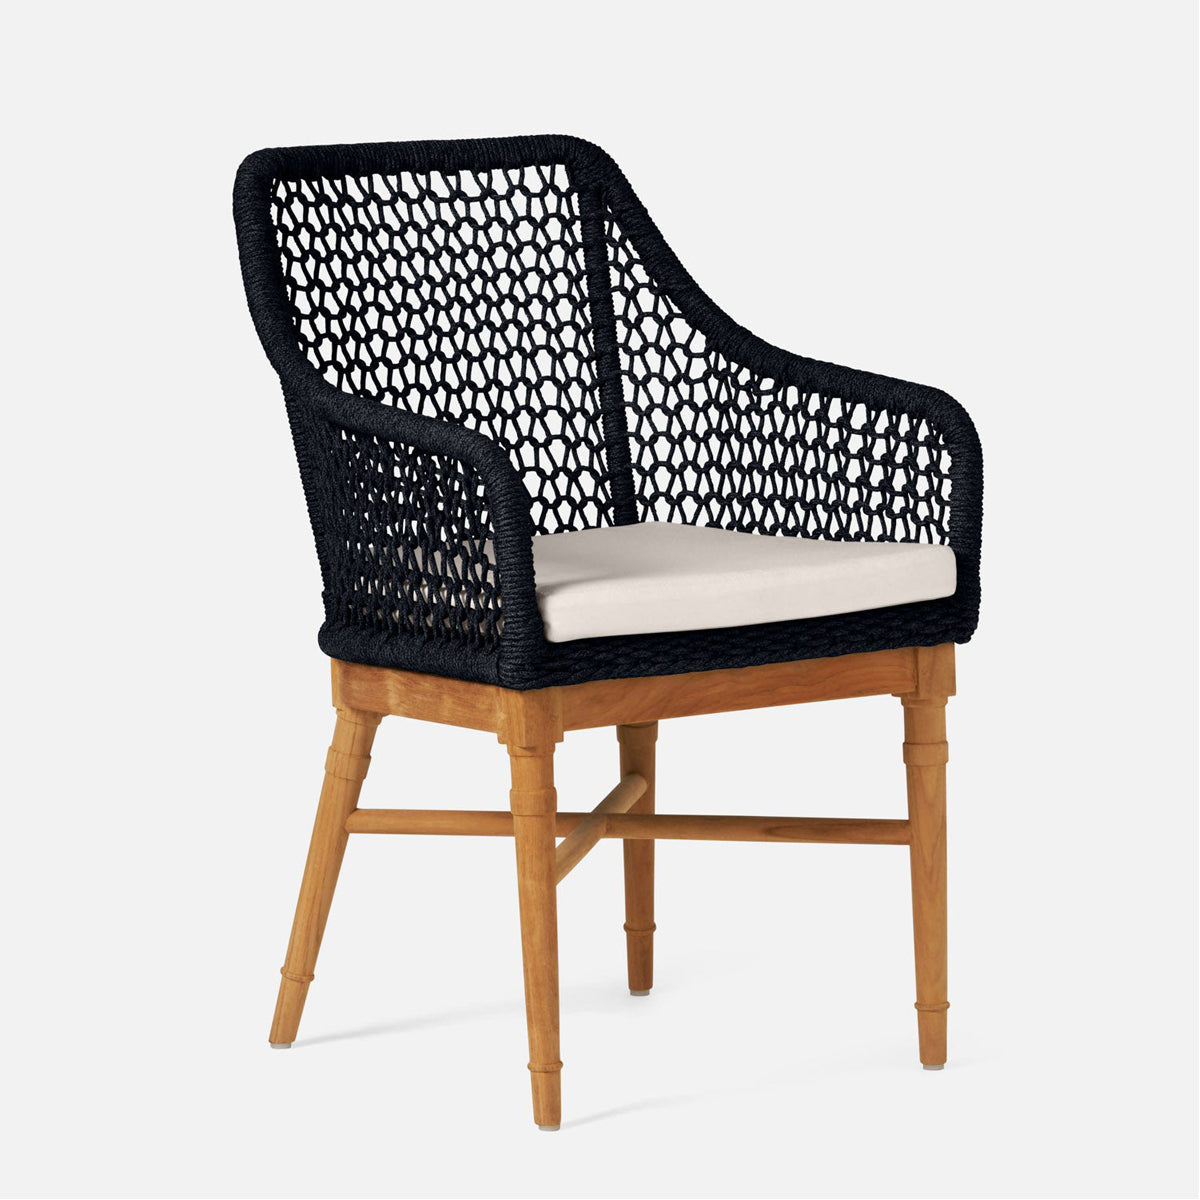 Made Goods Chadwick Outdoor Arm Chair in Liard Velvet